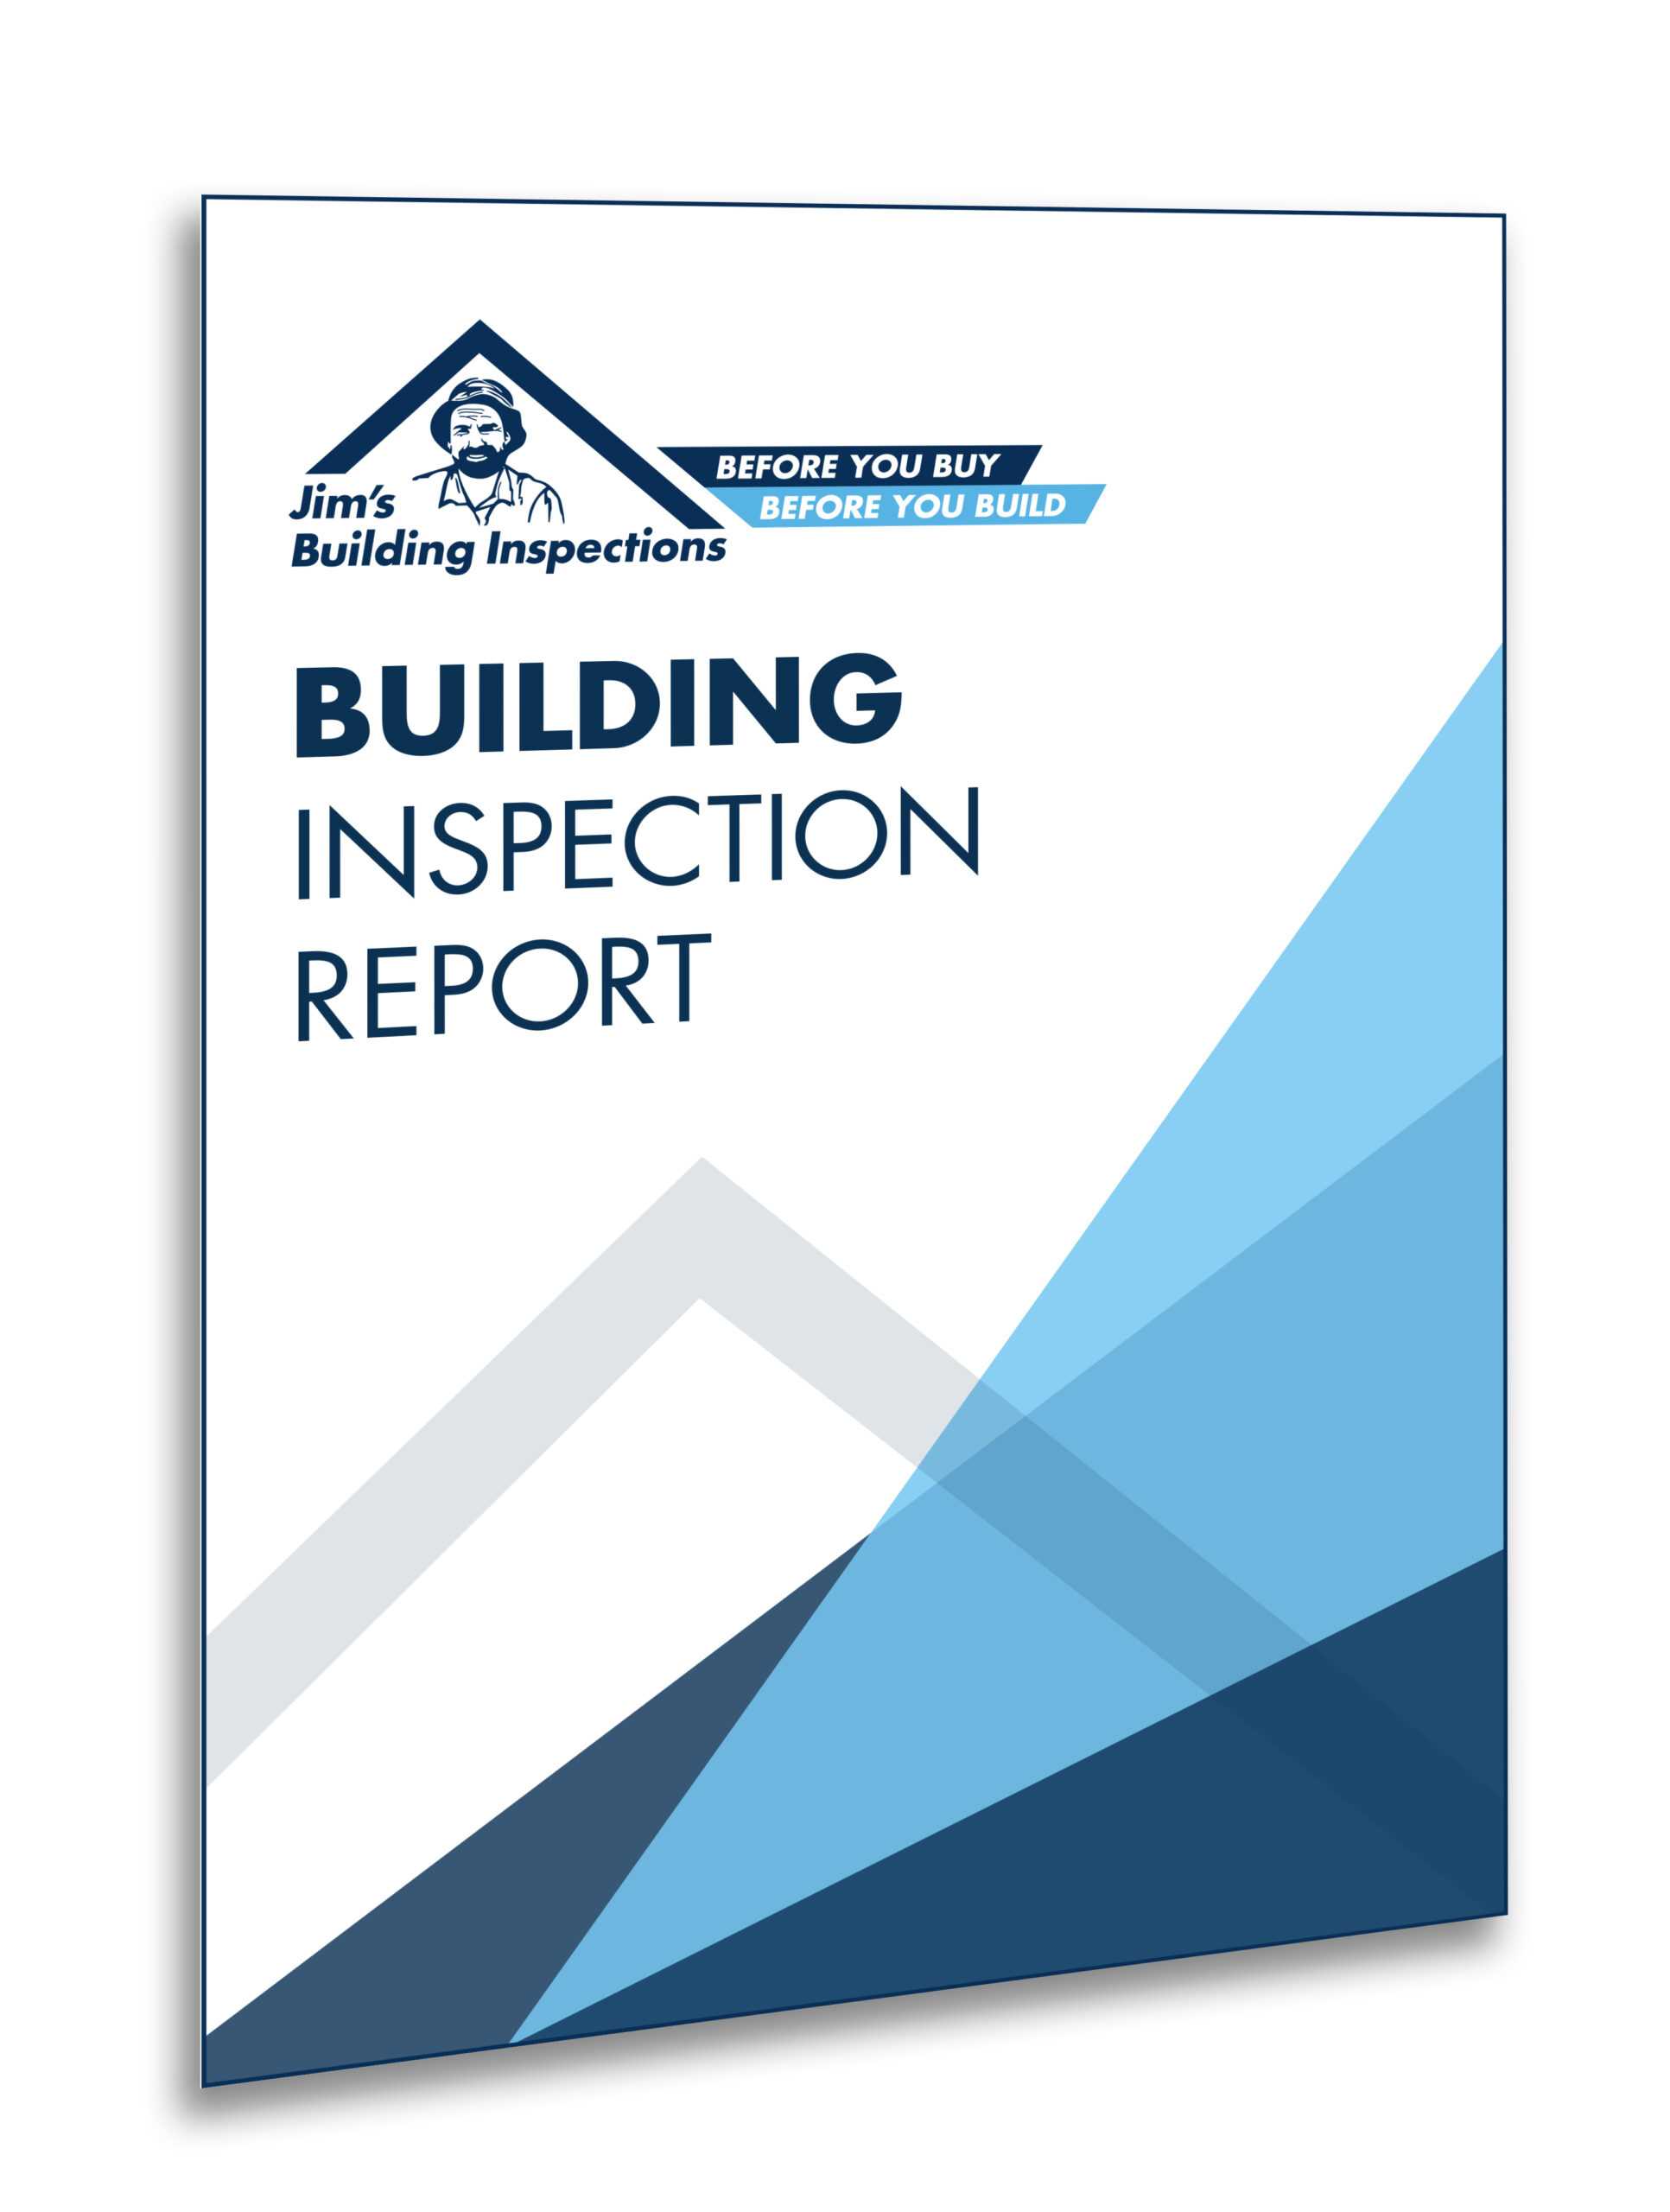 Sample Reports | Jim's Building Inspections Regarding Pre Purchase Building Inspection Report Template